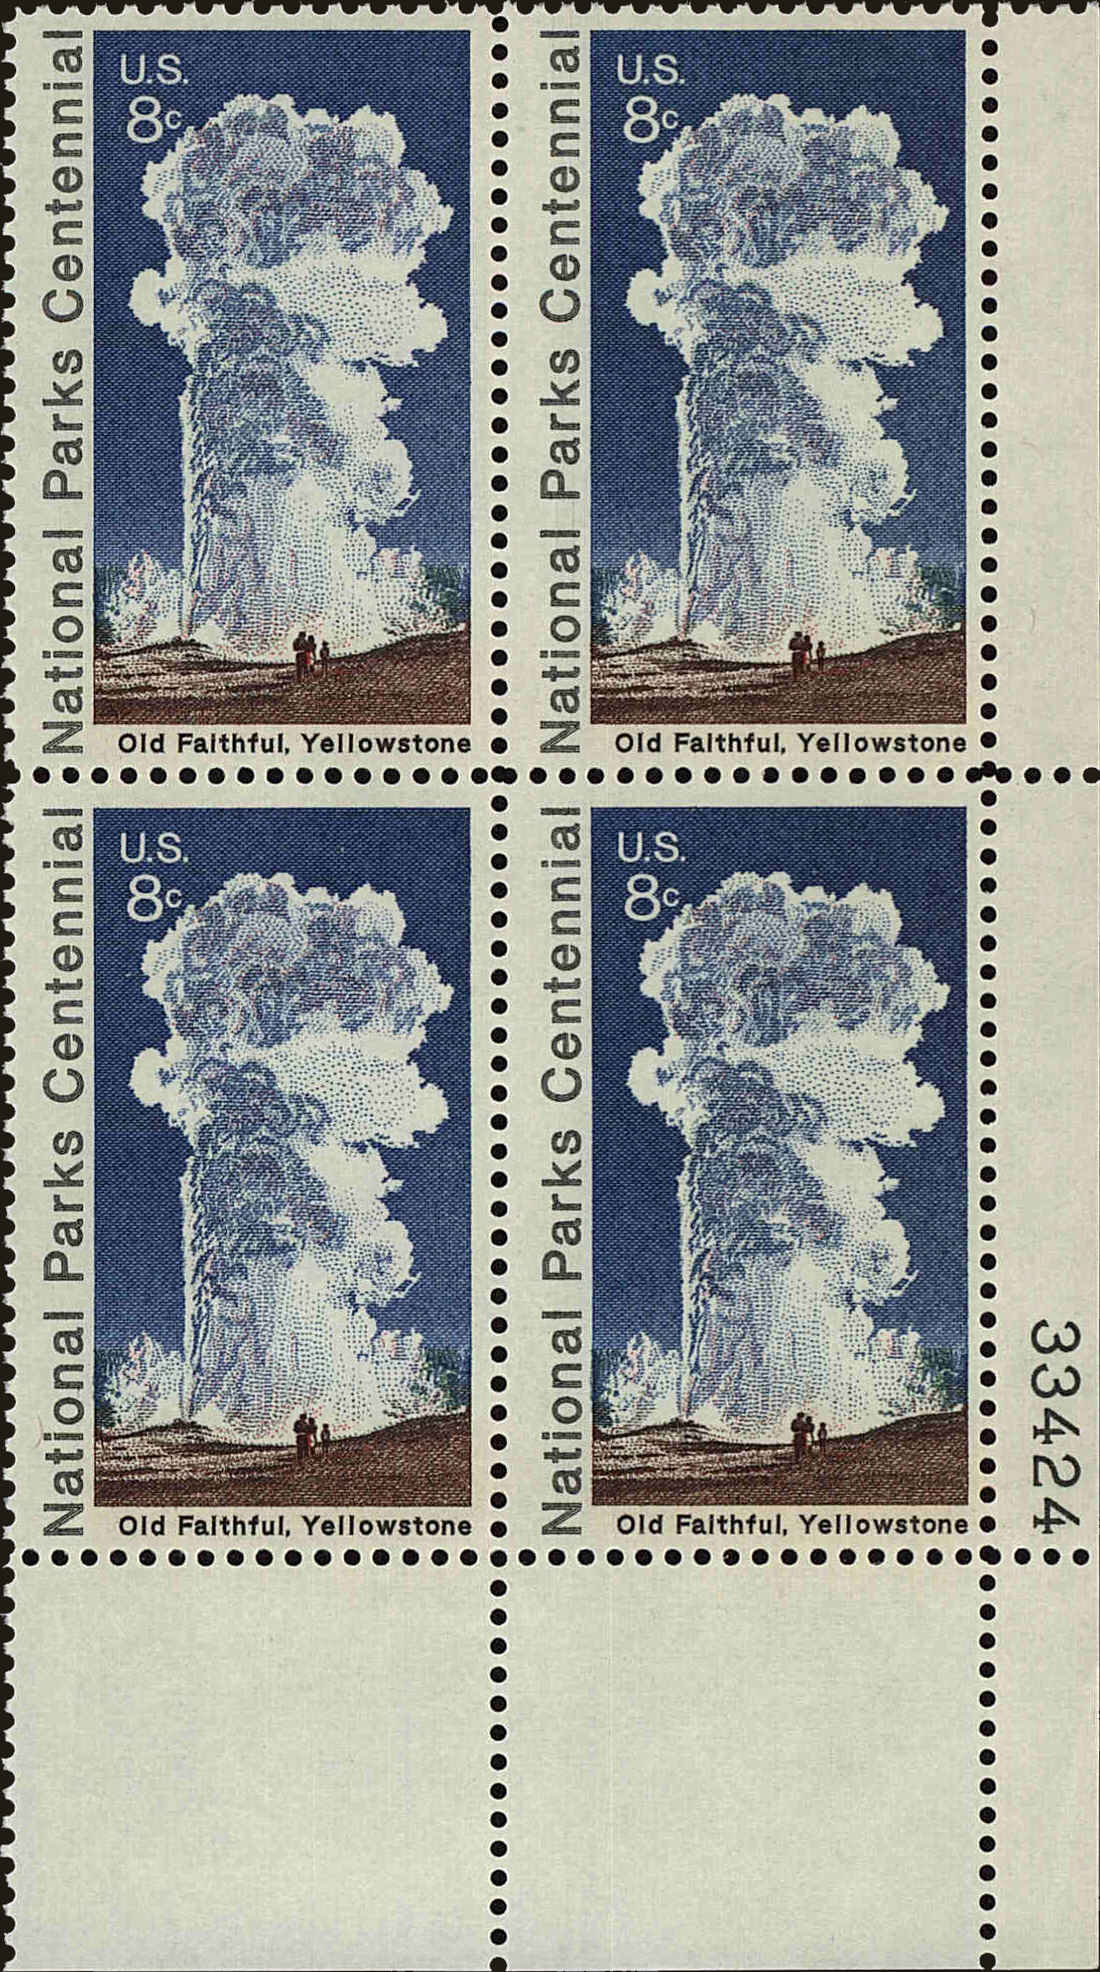 Front view of United States 1453 collectors stamp